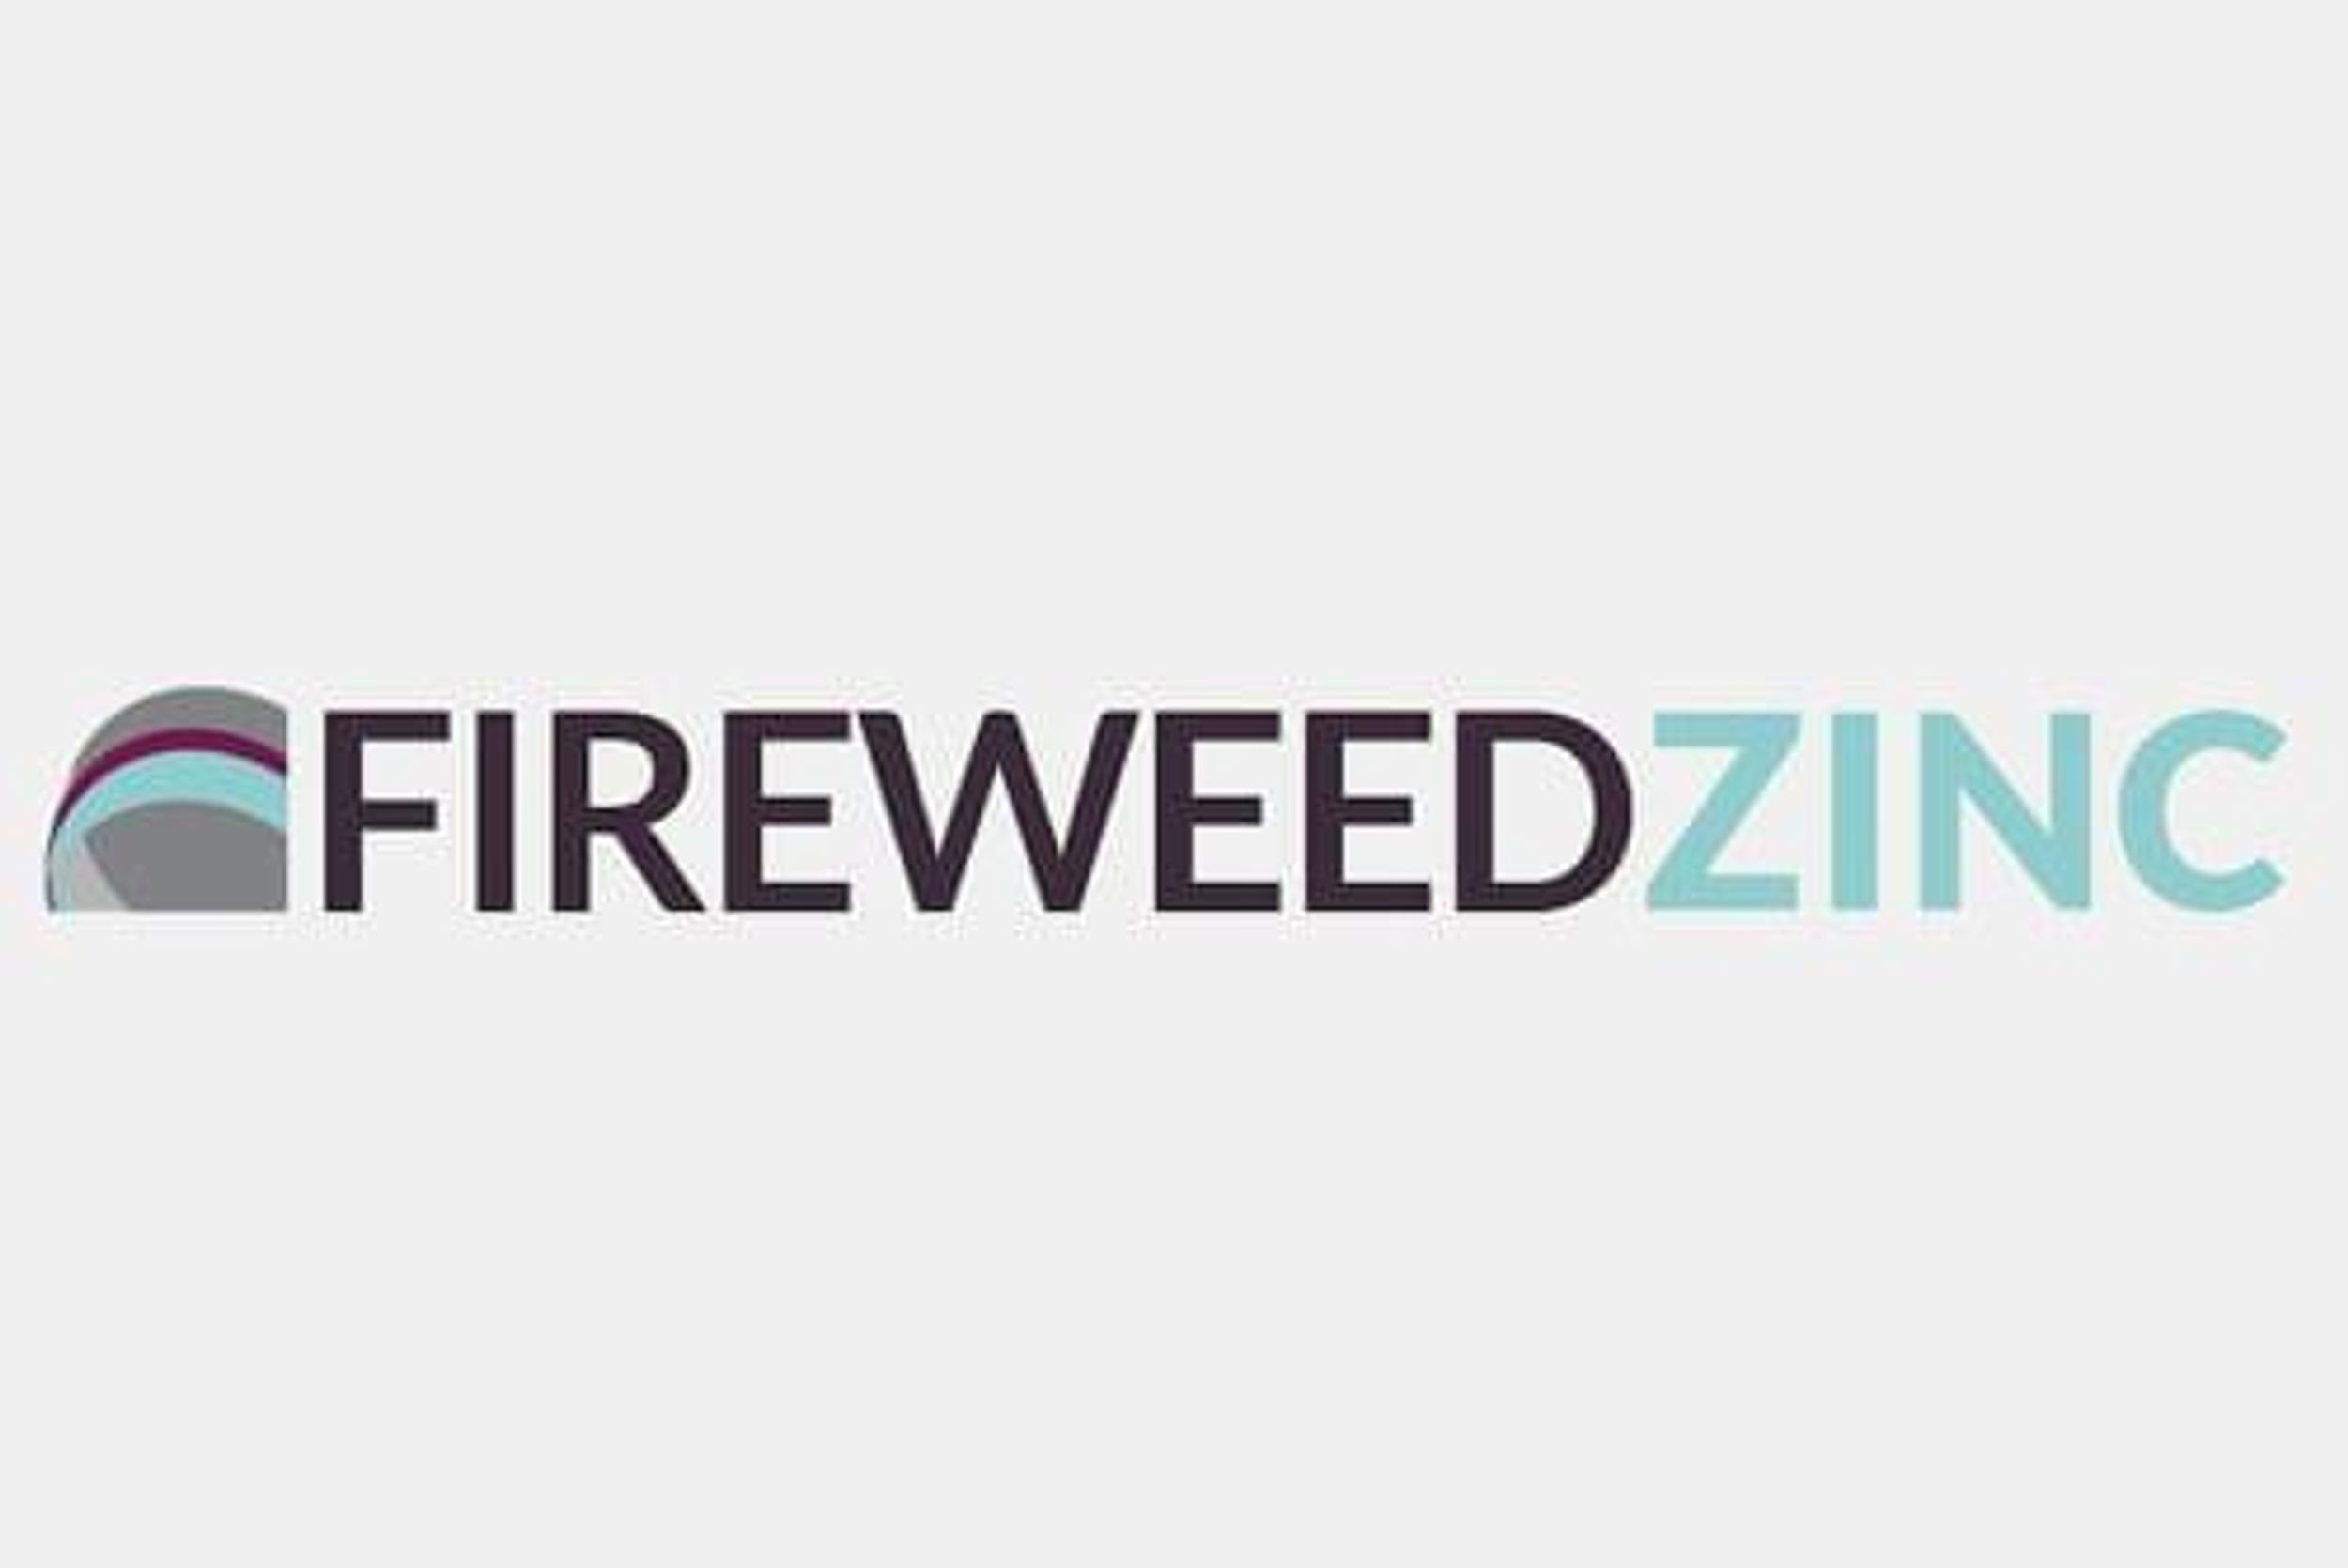 Fireweed Zinc Announces $9.7 Million Private Placement with Strategic Investors